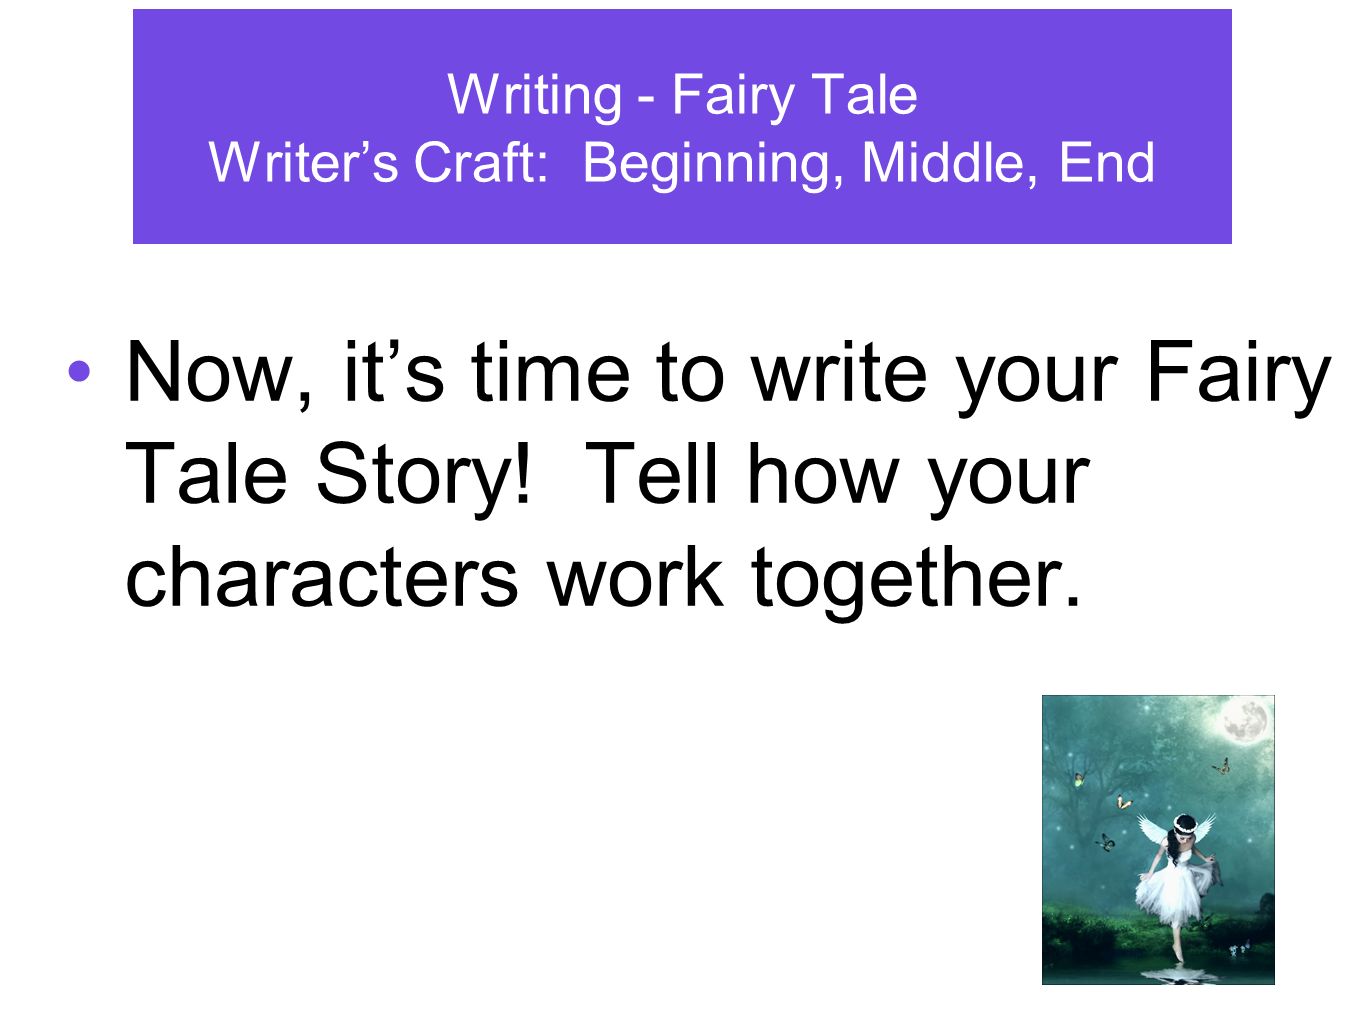 How to write a good tall tale story